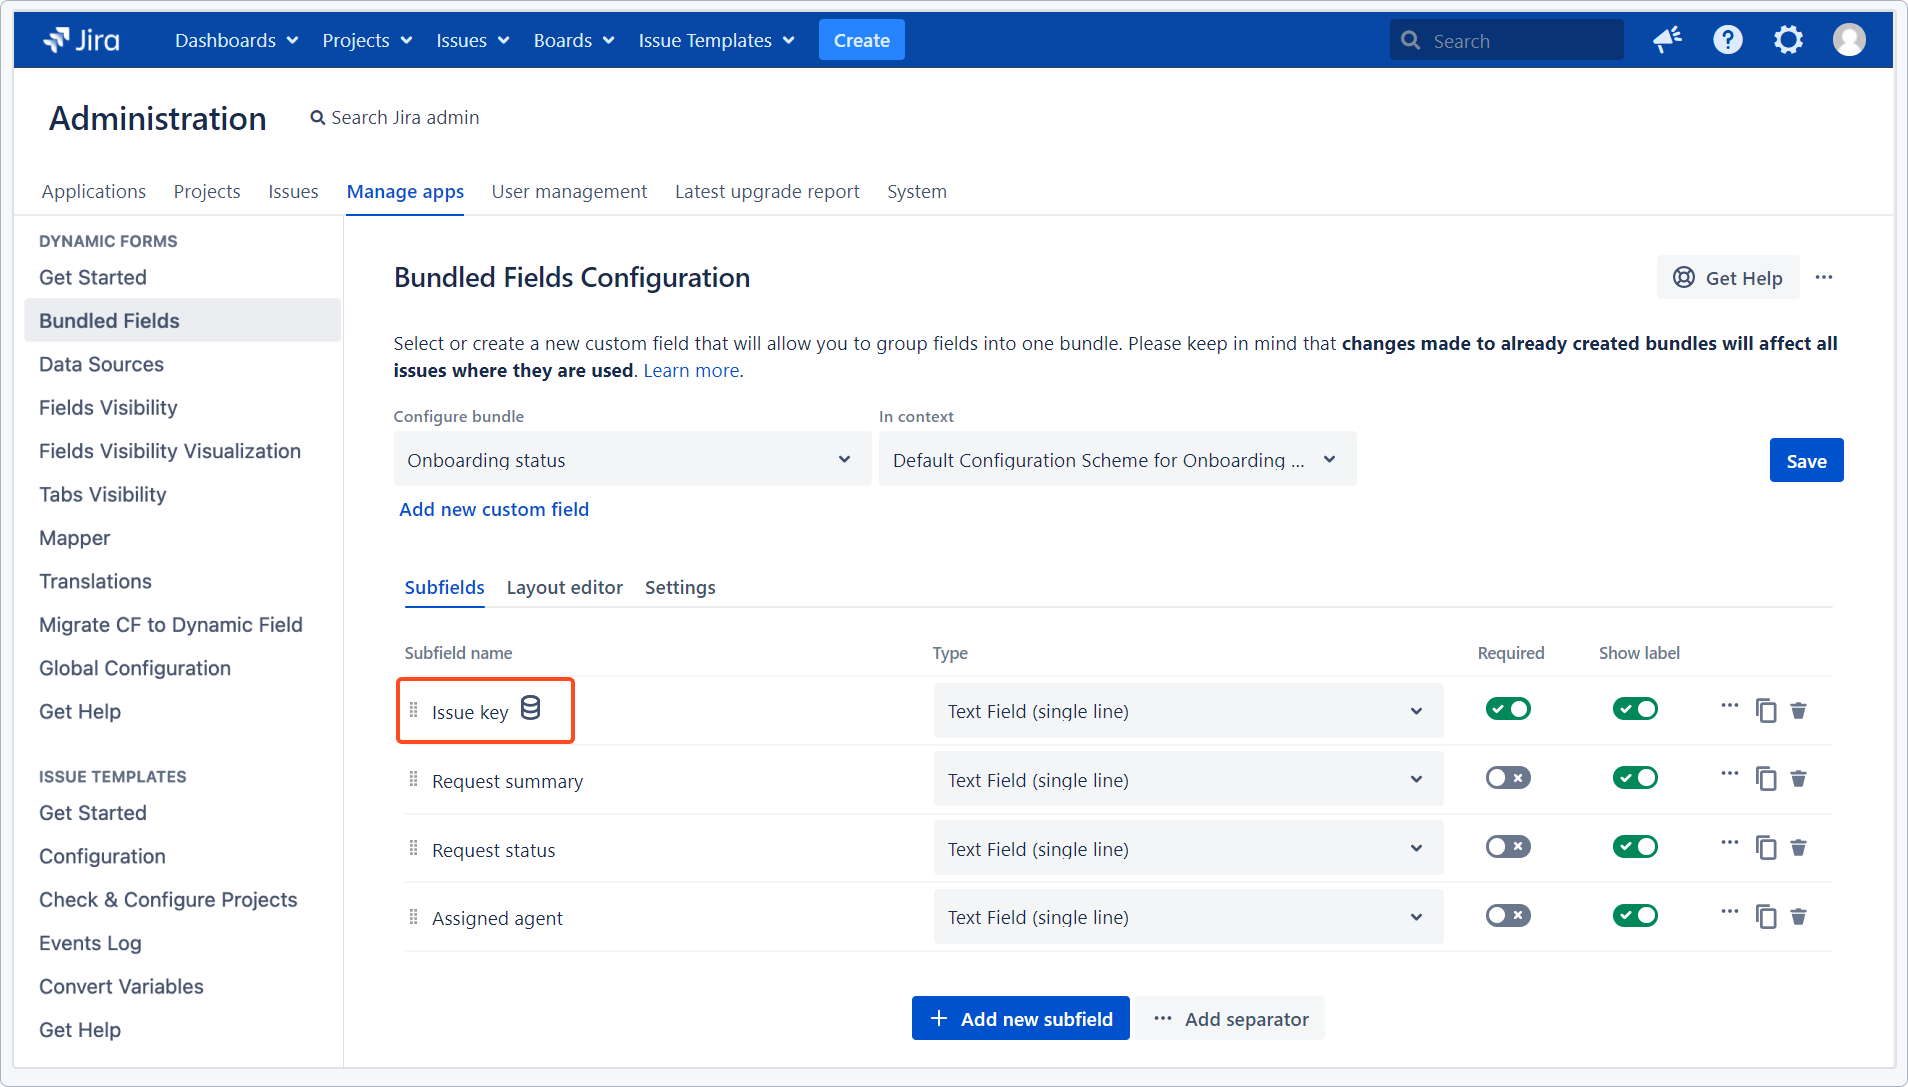 Dynamic Forms for Jira - Bundled Fields Data Sources: Connected subfield